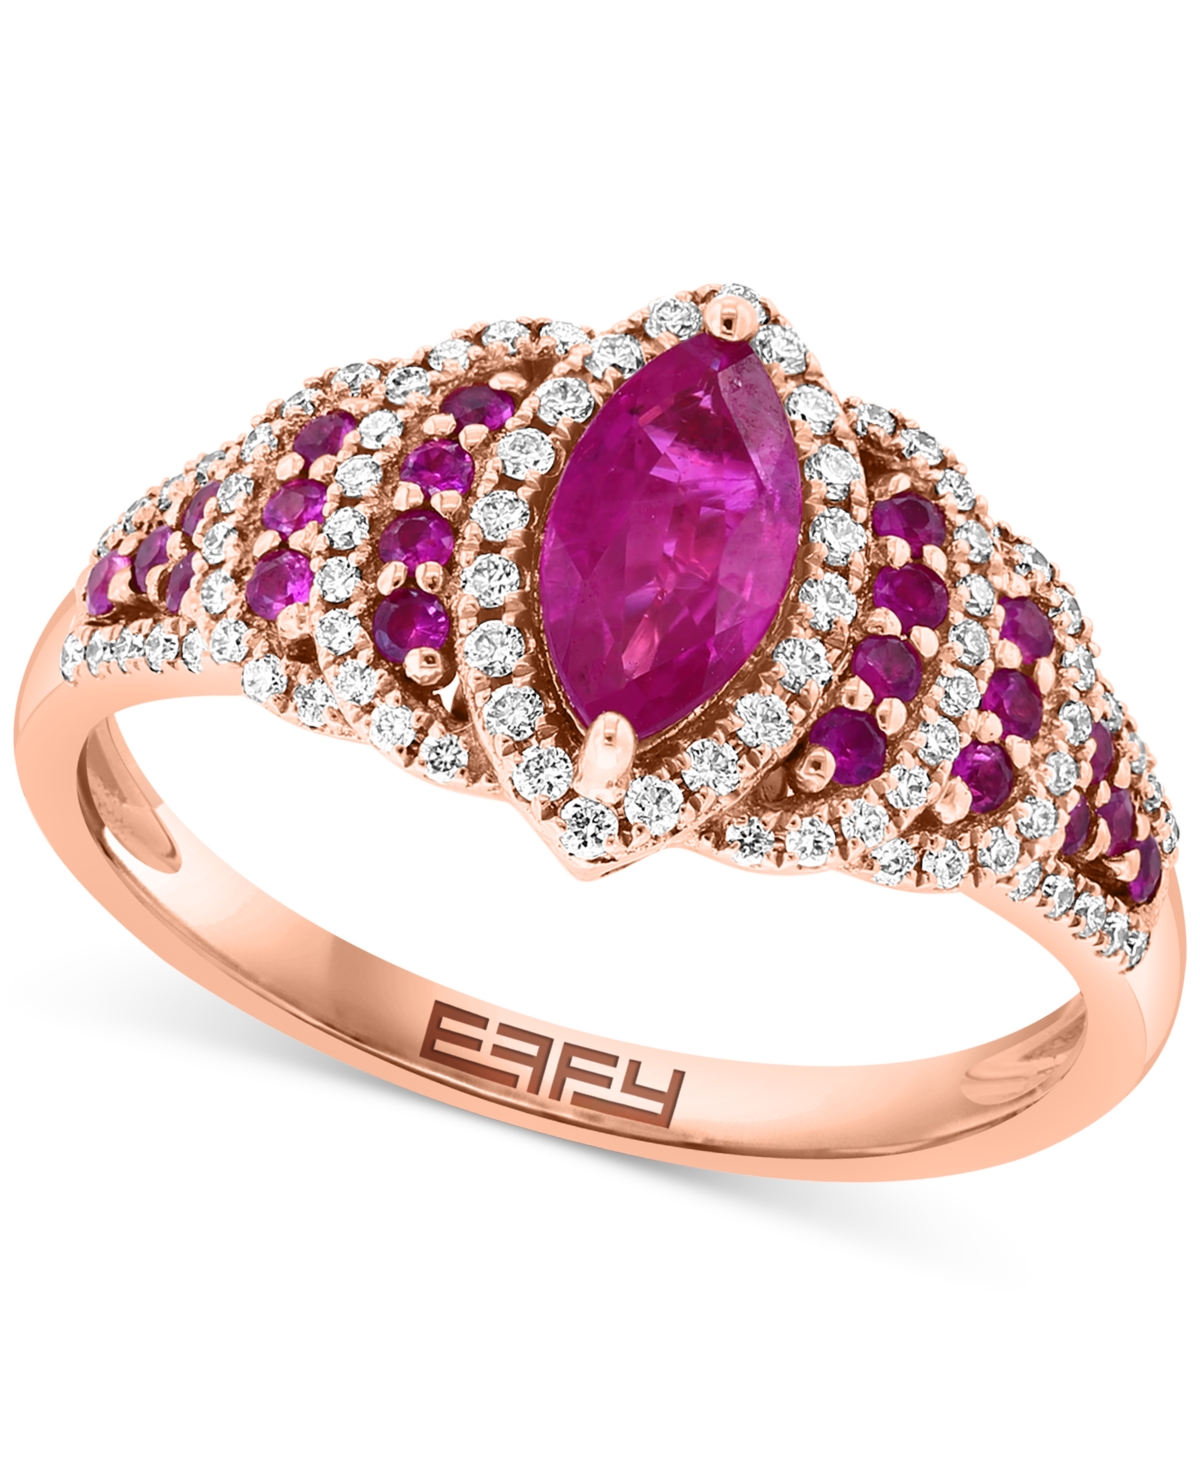 Effy Ruby (7/8 ct. t.w.) & Diamond (7/8 ct. t.w.) Marquise Halo Statement Ring in 14k Rose Gold - Rose Gld